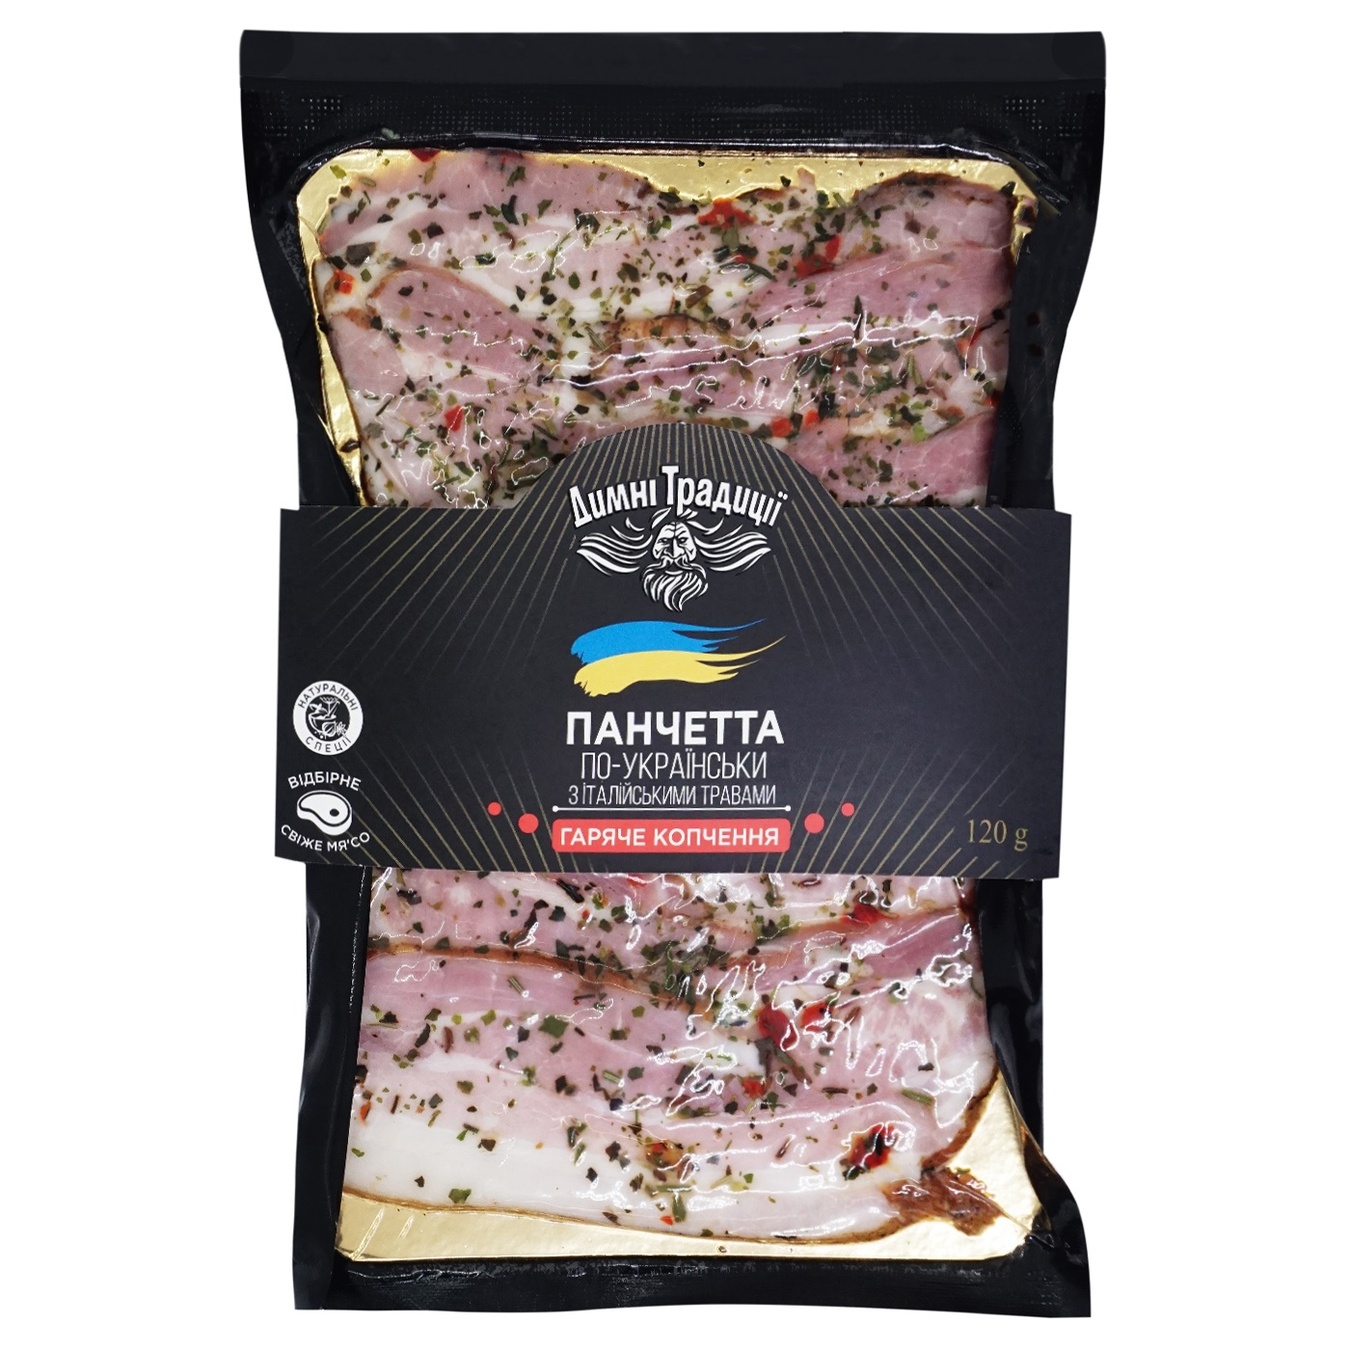 Hot-smoked pancetta Smoked traditions sliced ​​120g